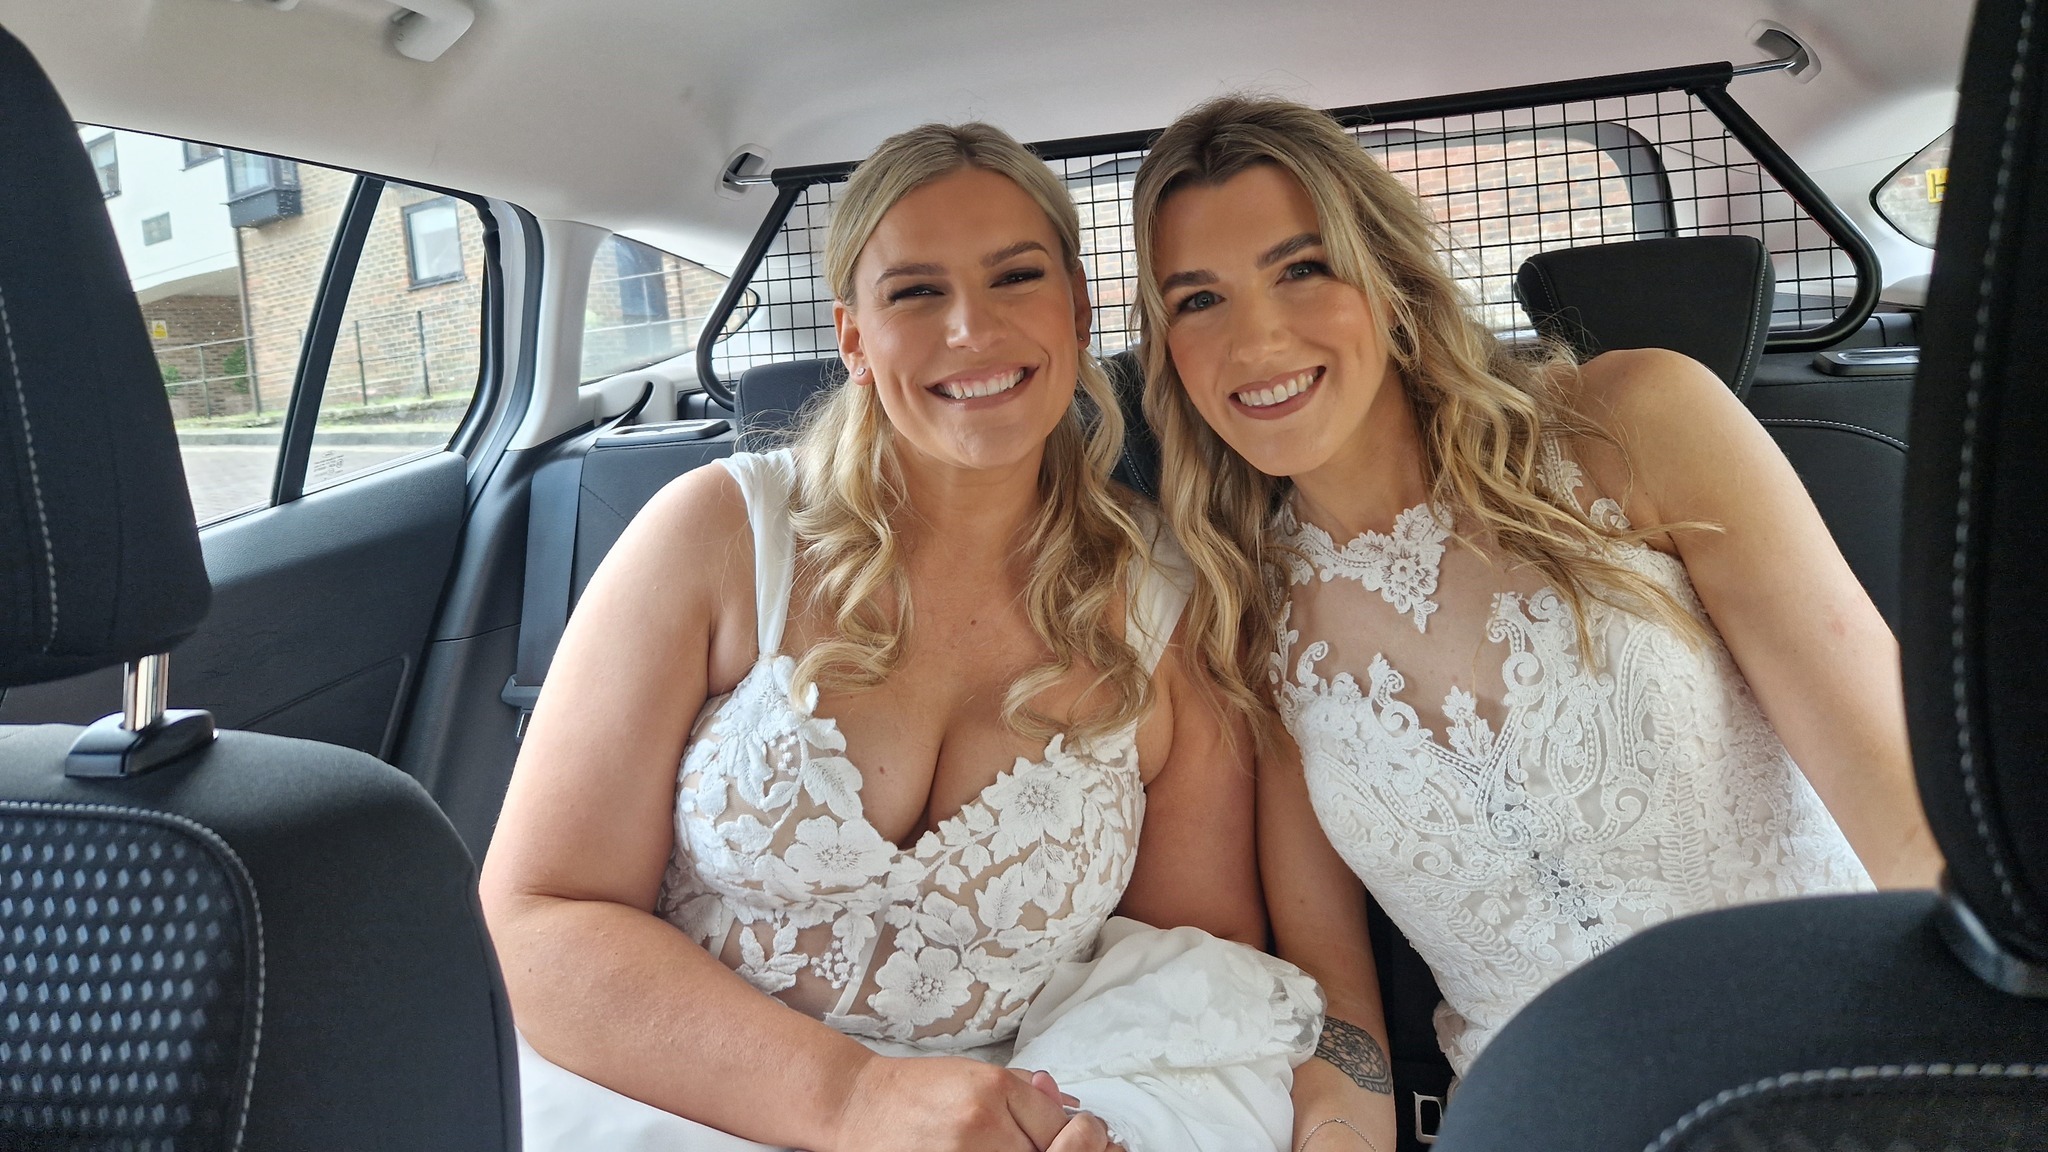 Two brides get police escort to Southampton wedding venue after coach breaks down near Hedge End ITV News Meridian